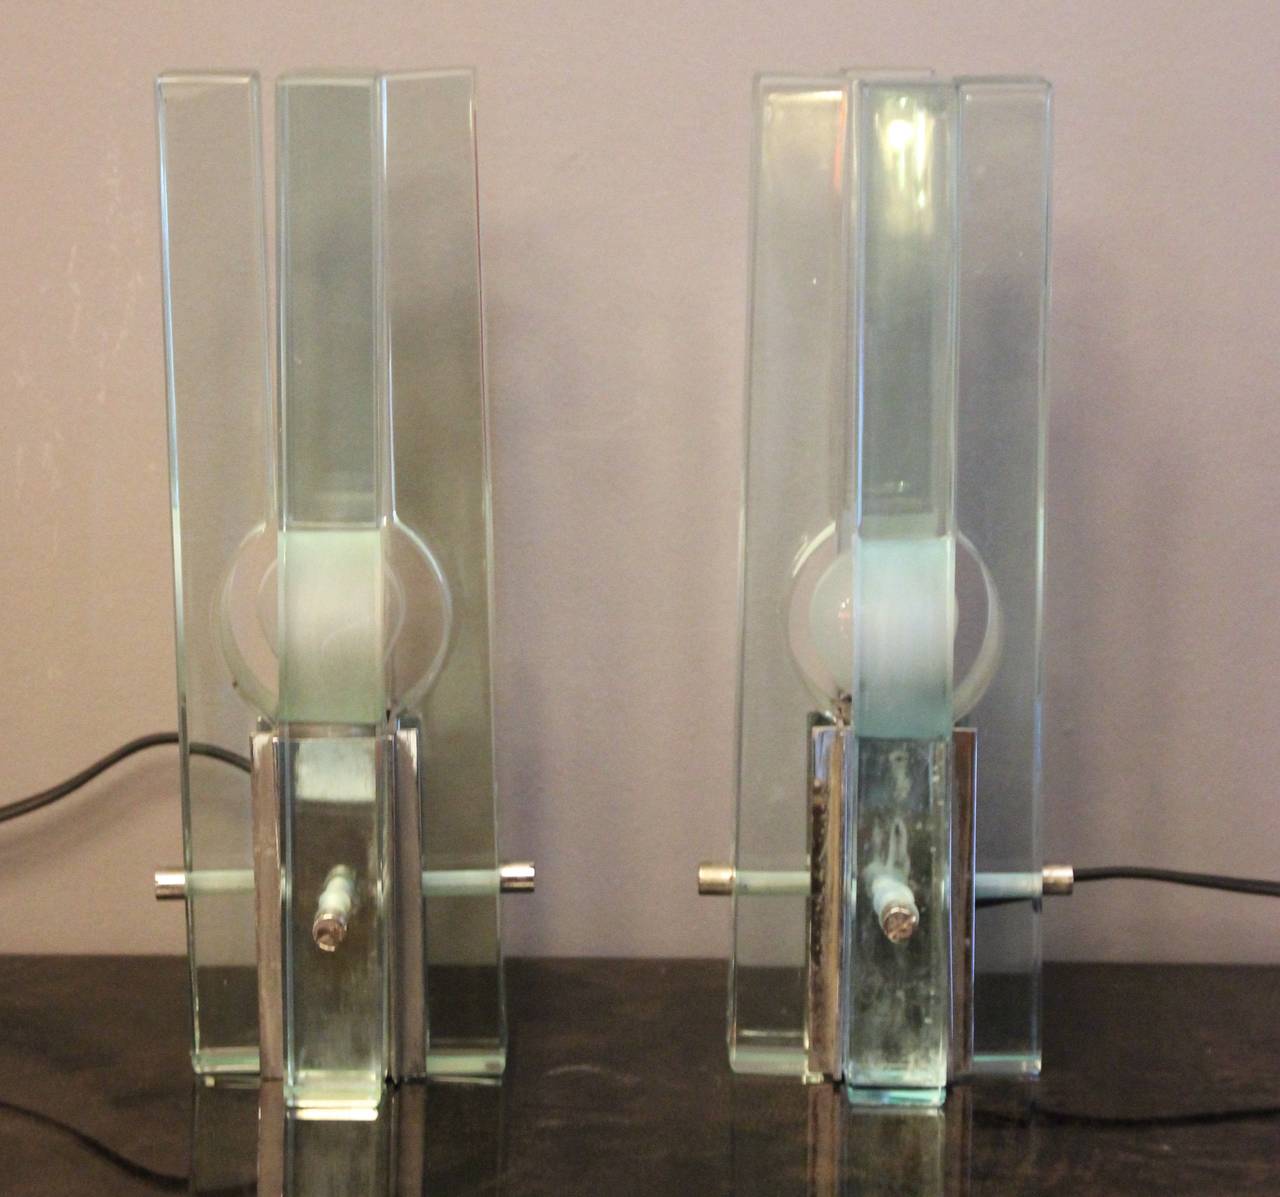 Fontana Arte,
pair of table lamps,
chromed steel and glass,
circa 1970, Italy.
Measure: Height: 30 cm, width 11 cm, depth: 11 cm.